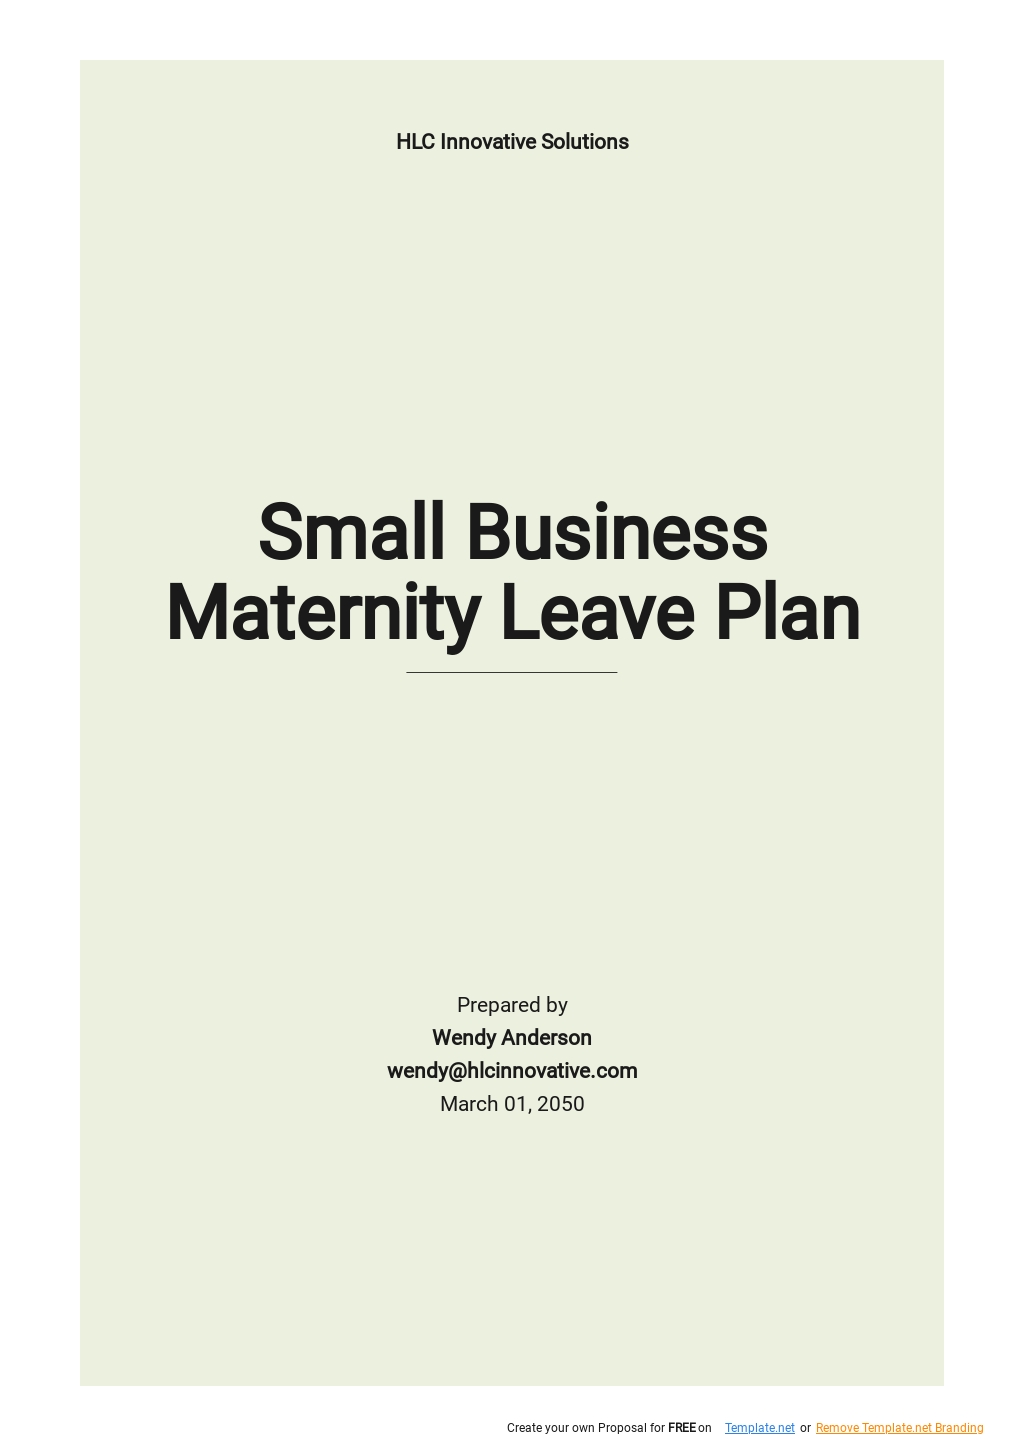 Small Business Maternity Leave Plan Template